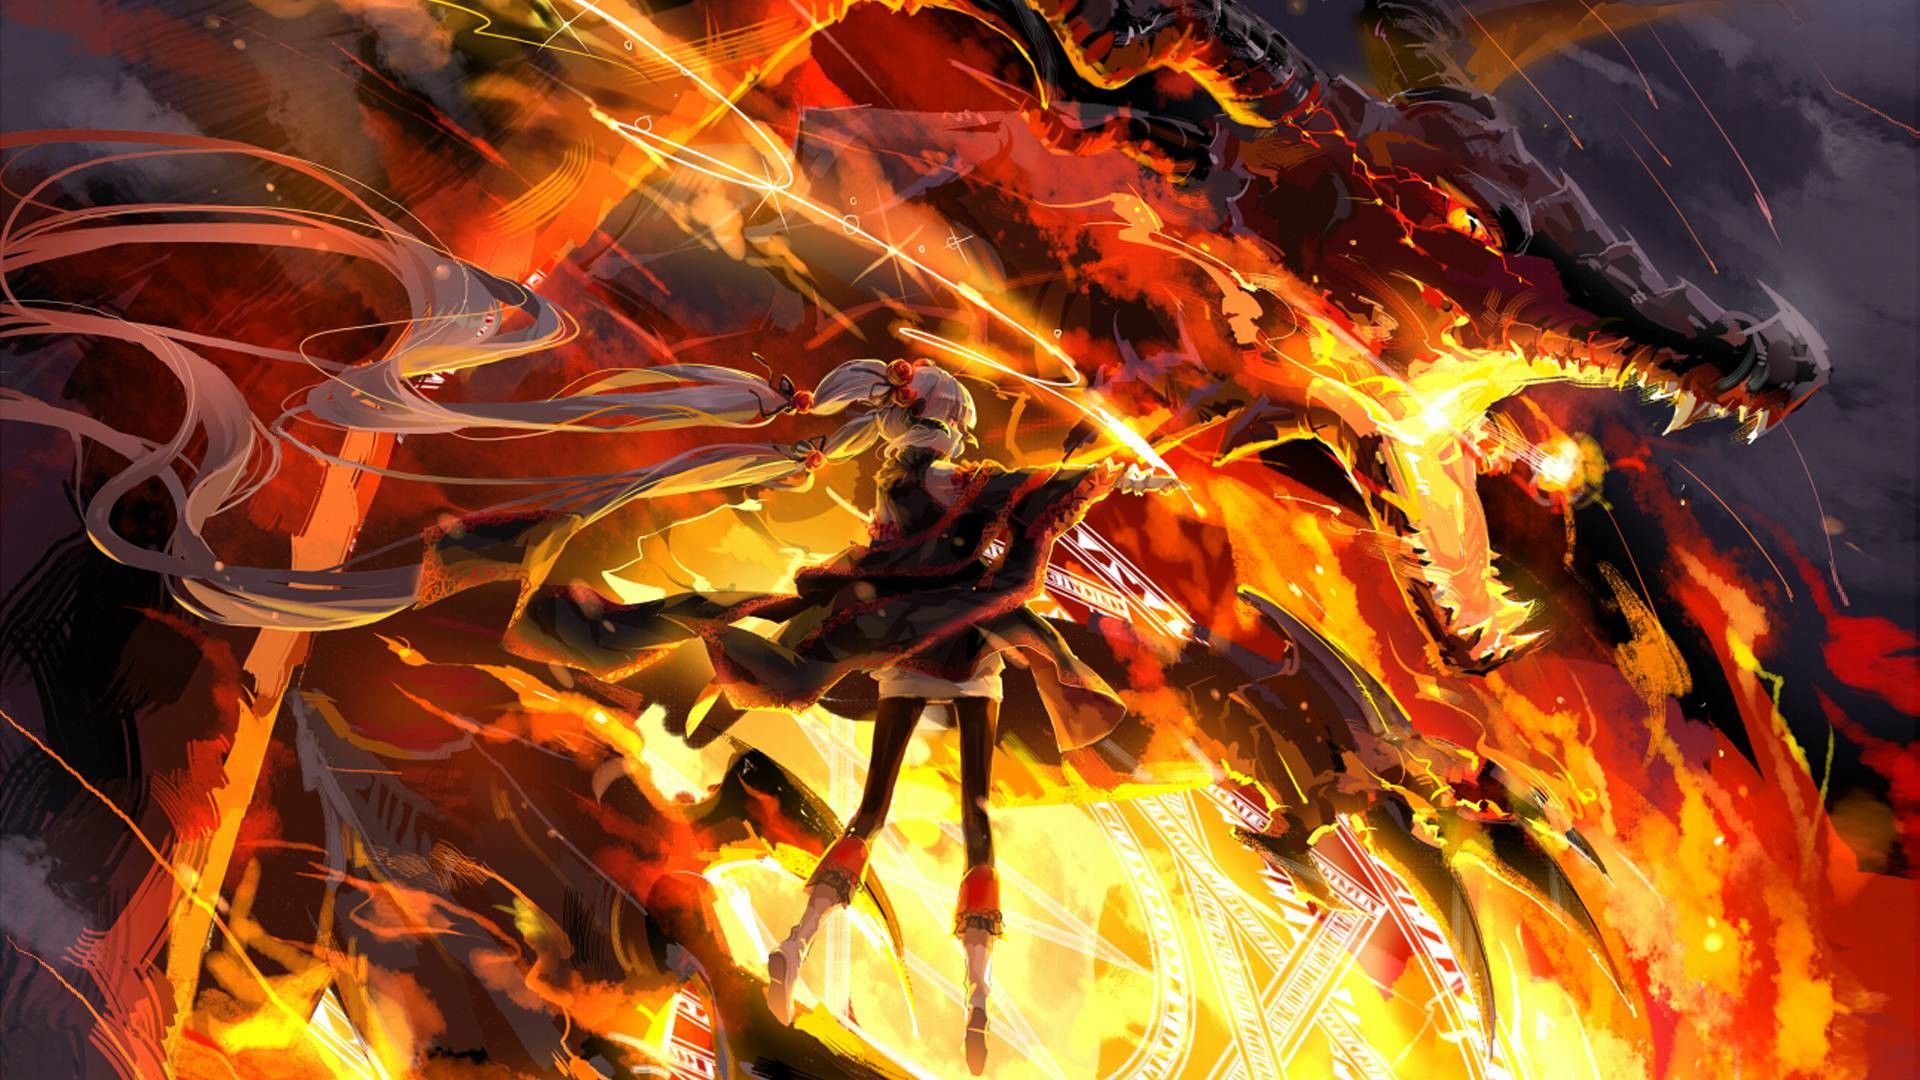 Related Image Anime Wallpaper Fire Dragon Nightcore